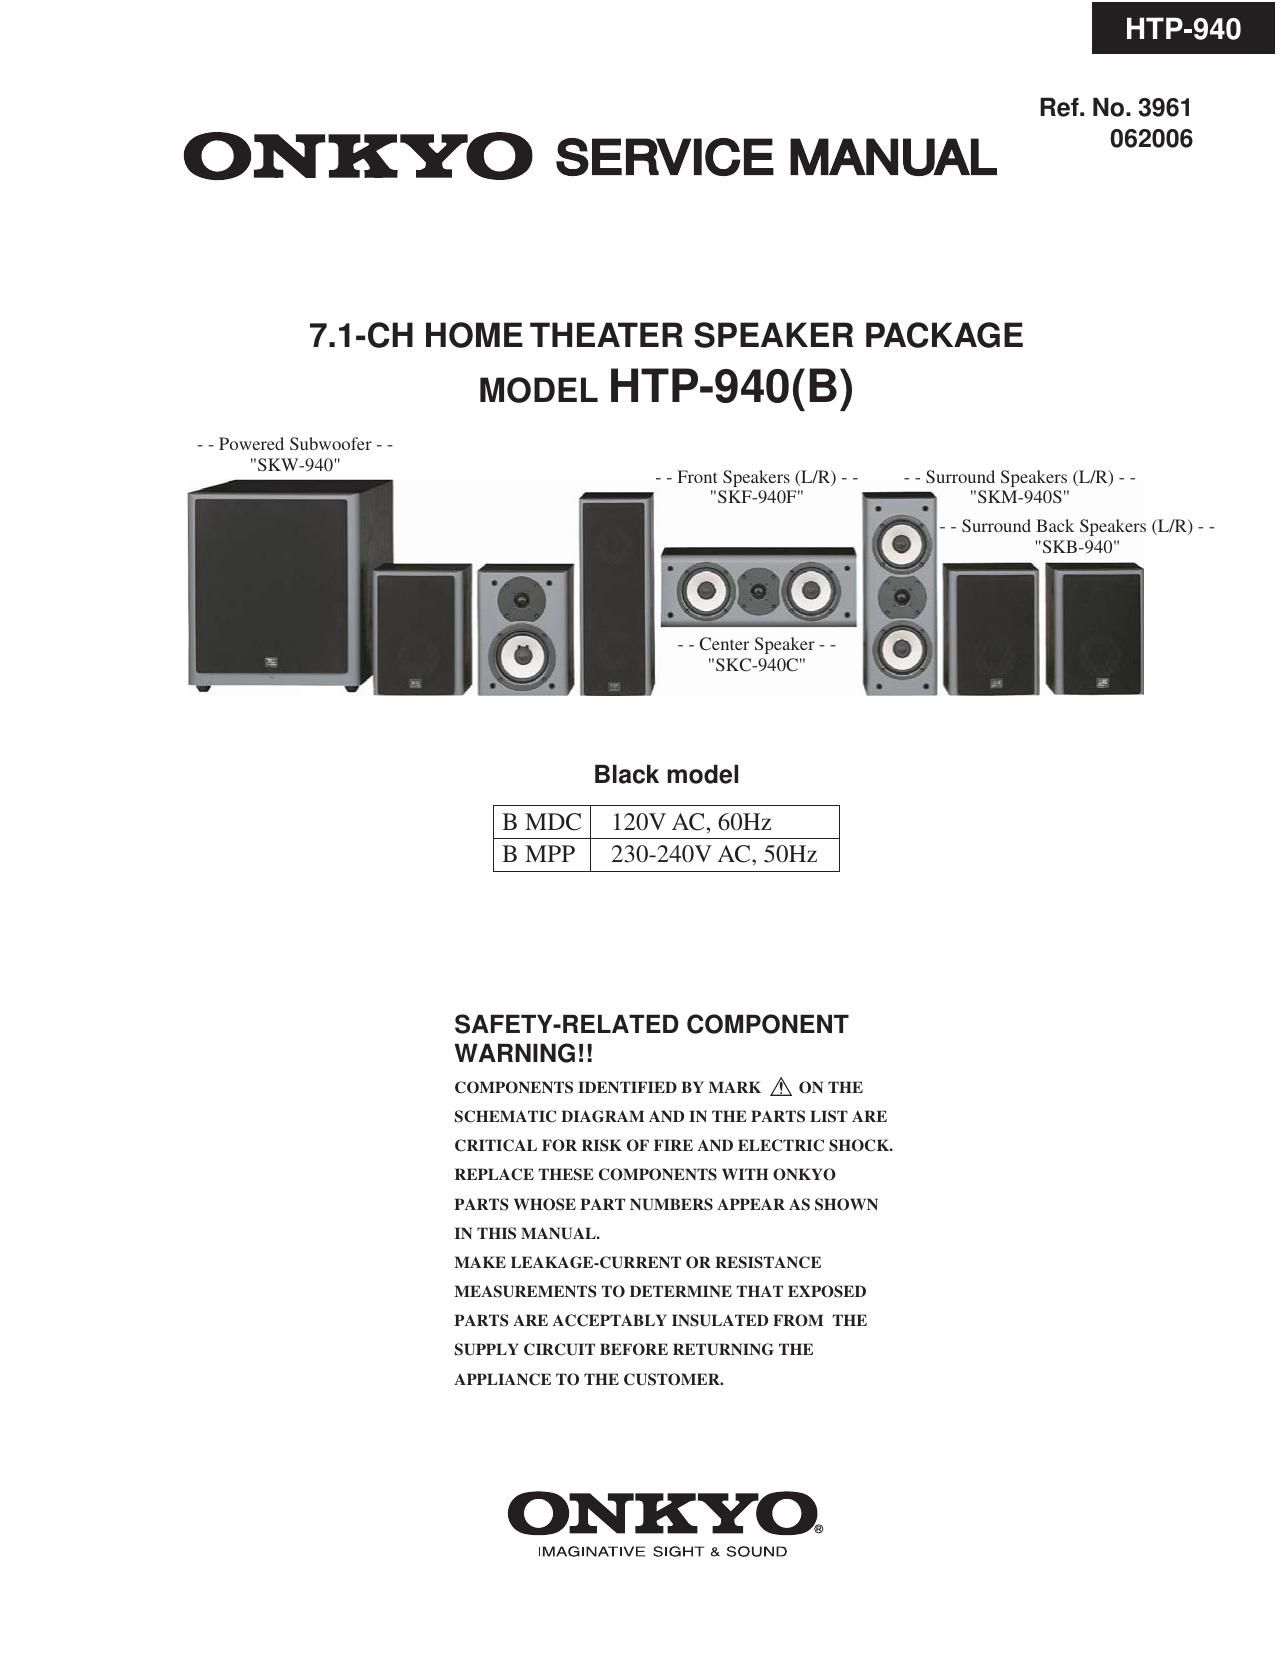 Onkyo SKW 940 Service Manual